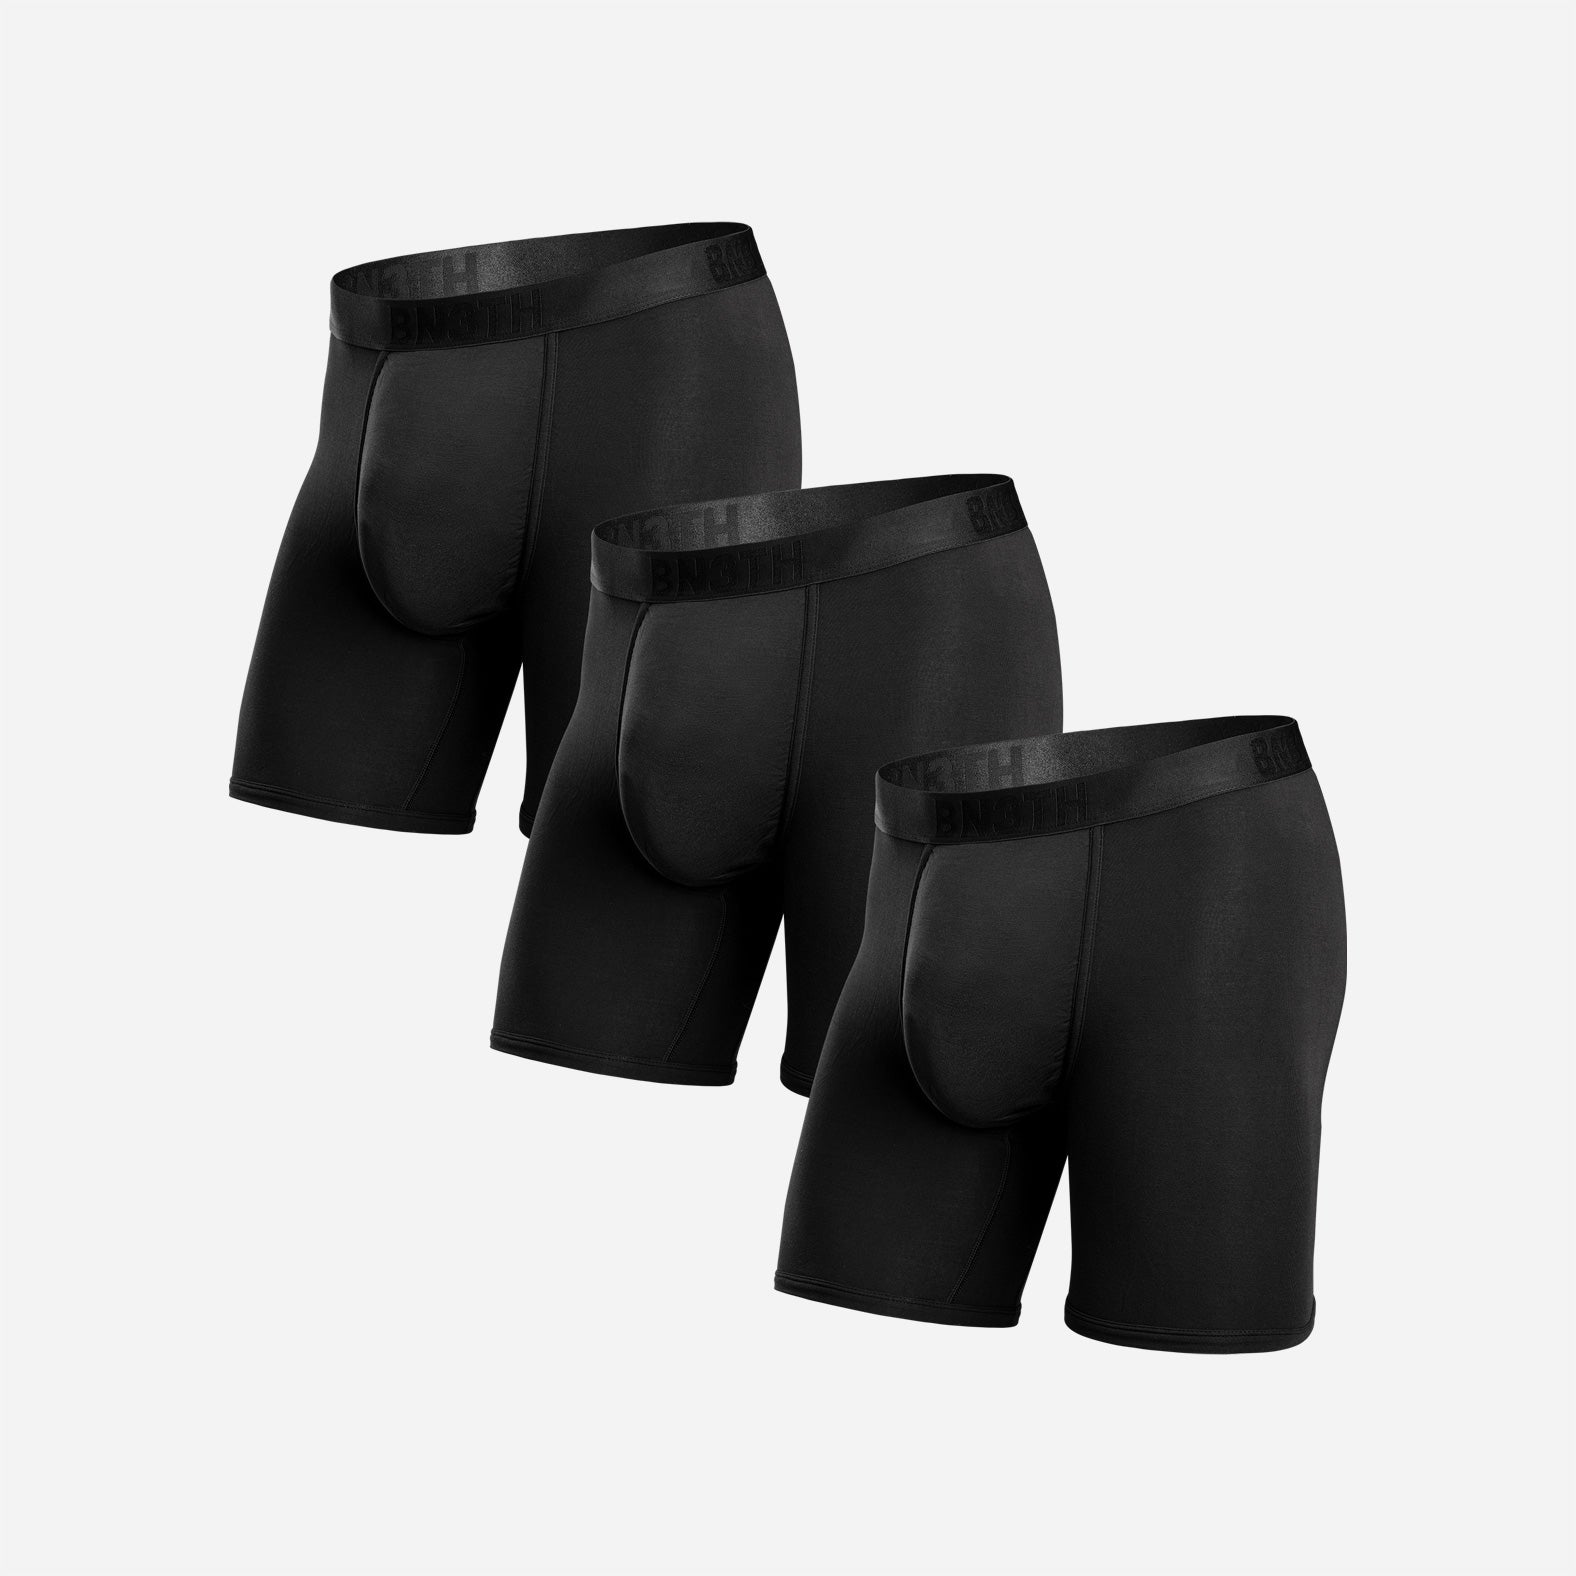 Daily Performance Boxer Brief in Black, Underwear for Work to Workouts, Myles